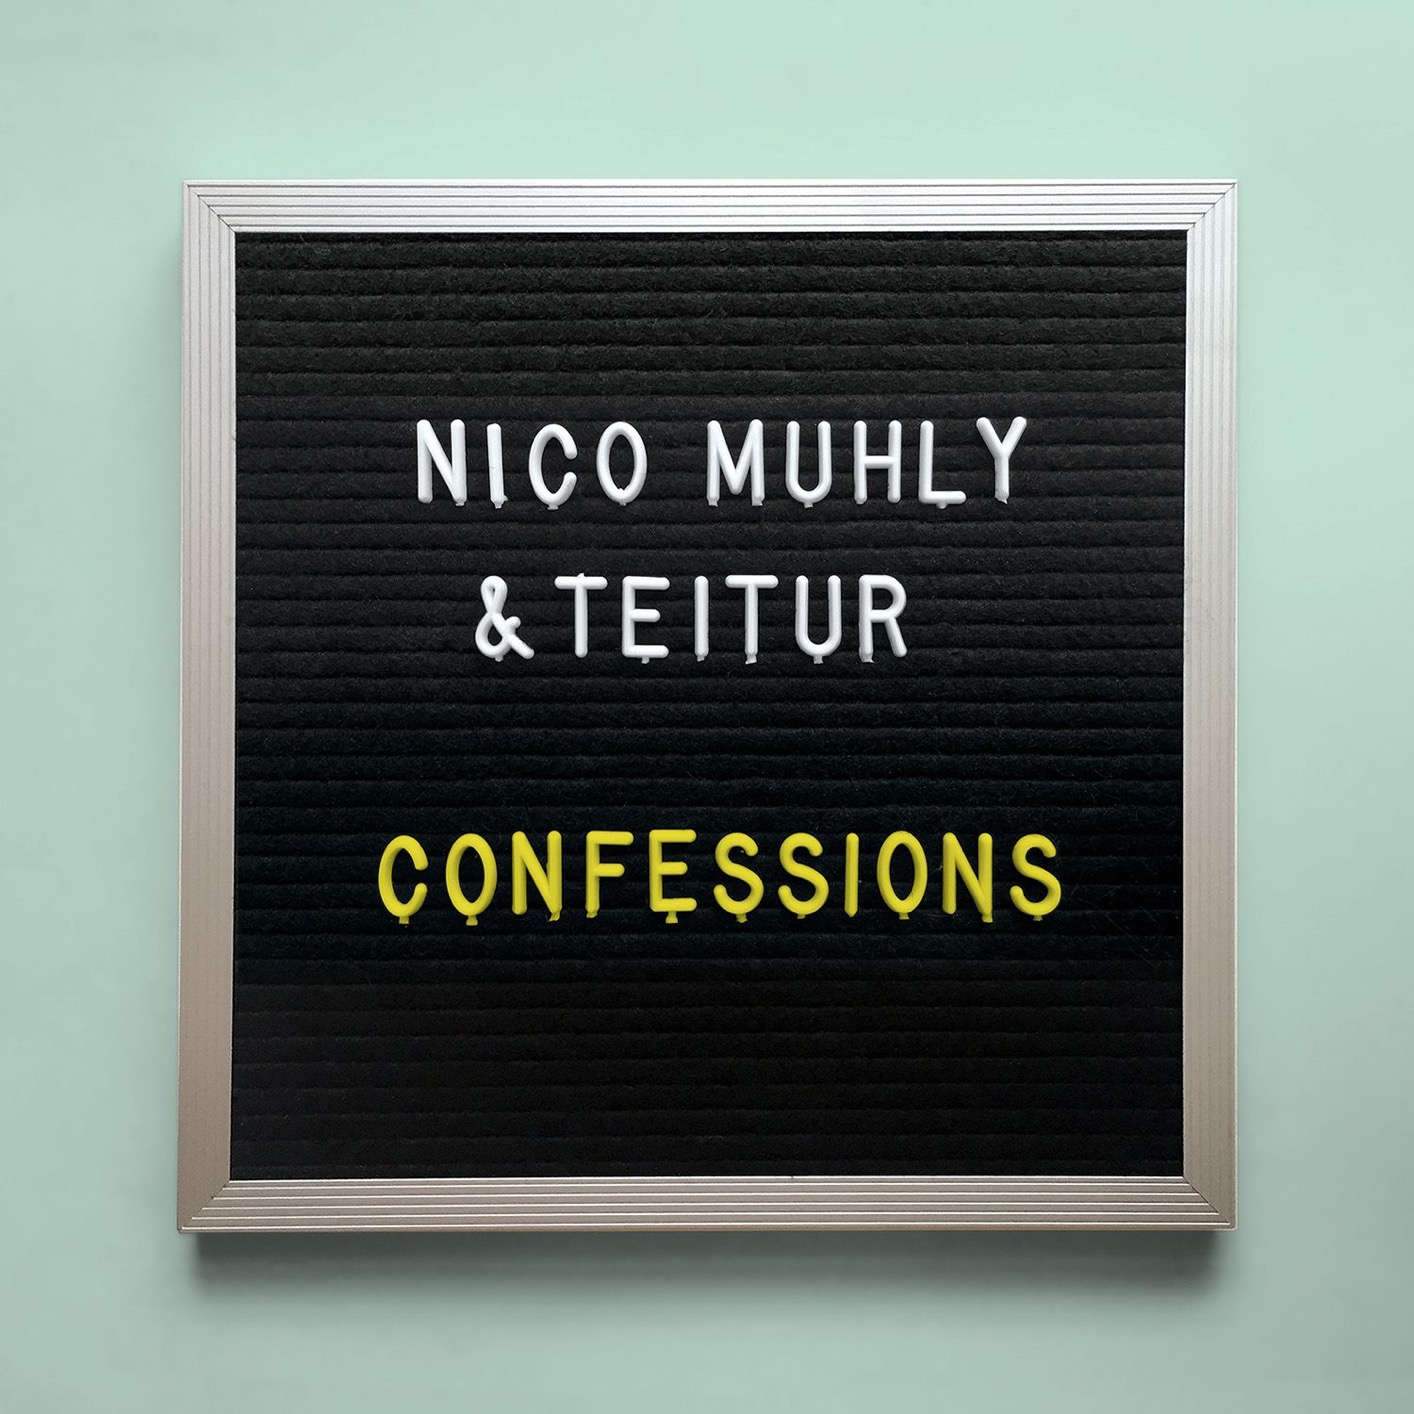 Nico Muhly & Teitur - Confessions (2016) [FLAC 24bit/44,1kHz]